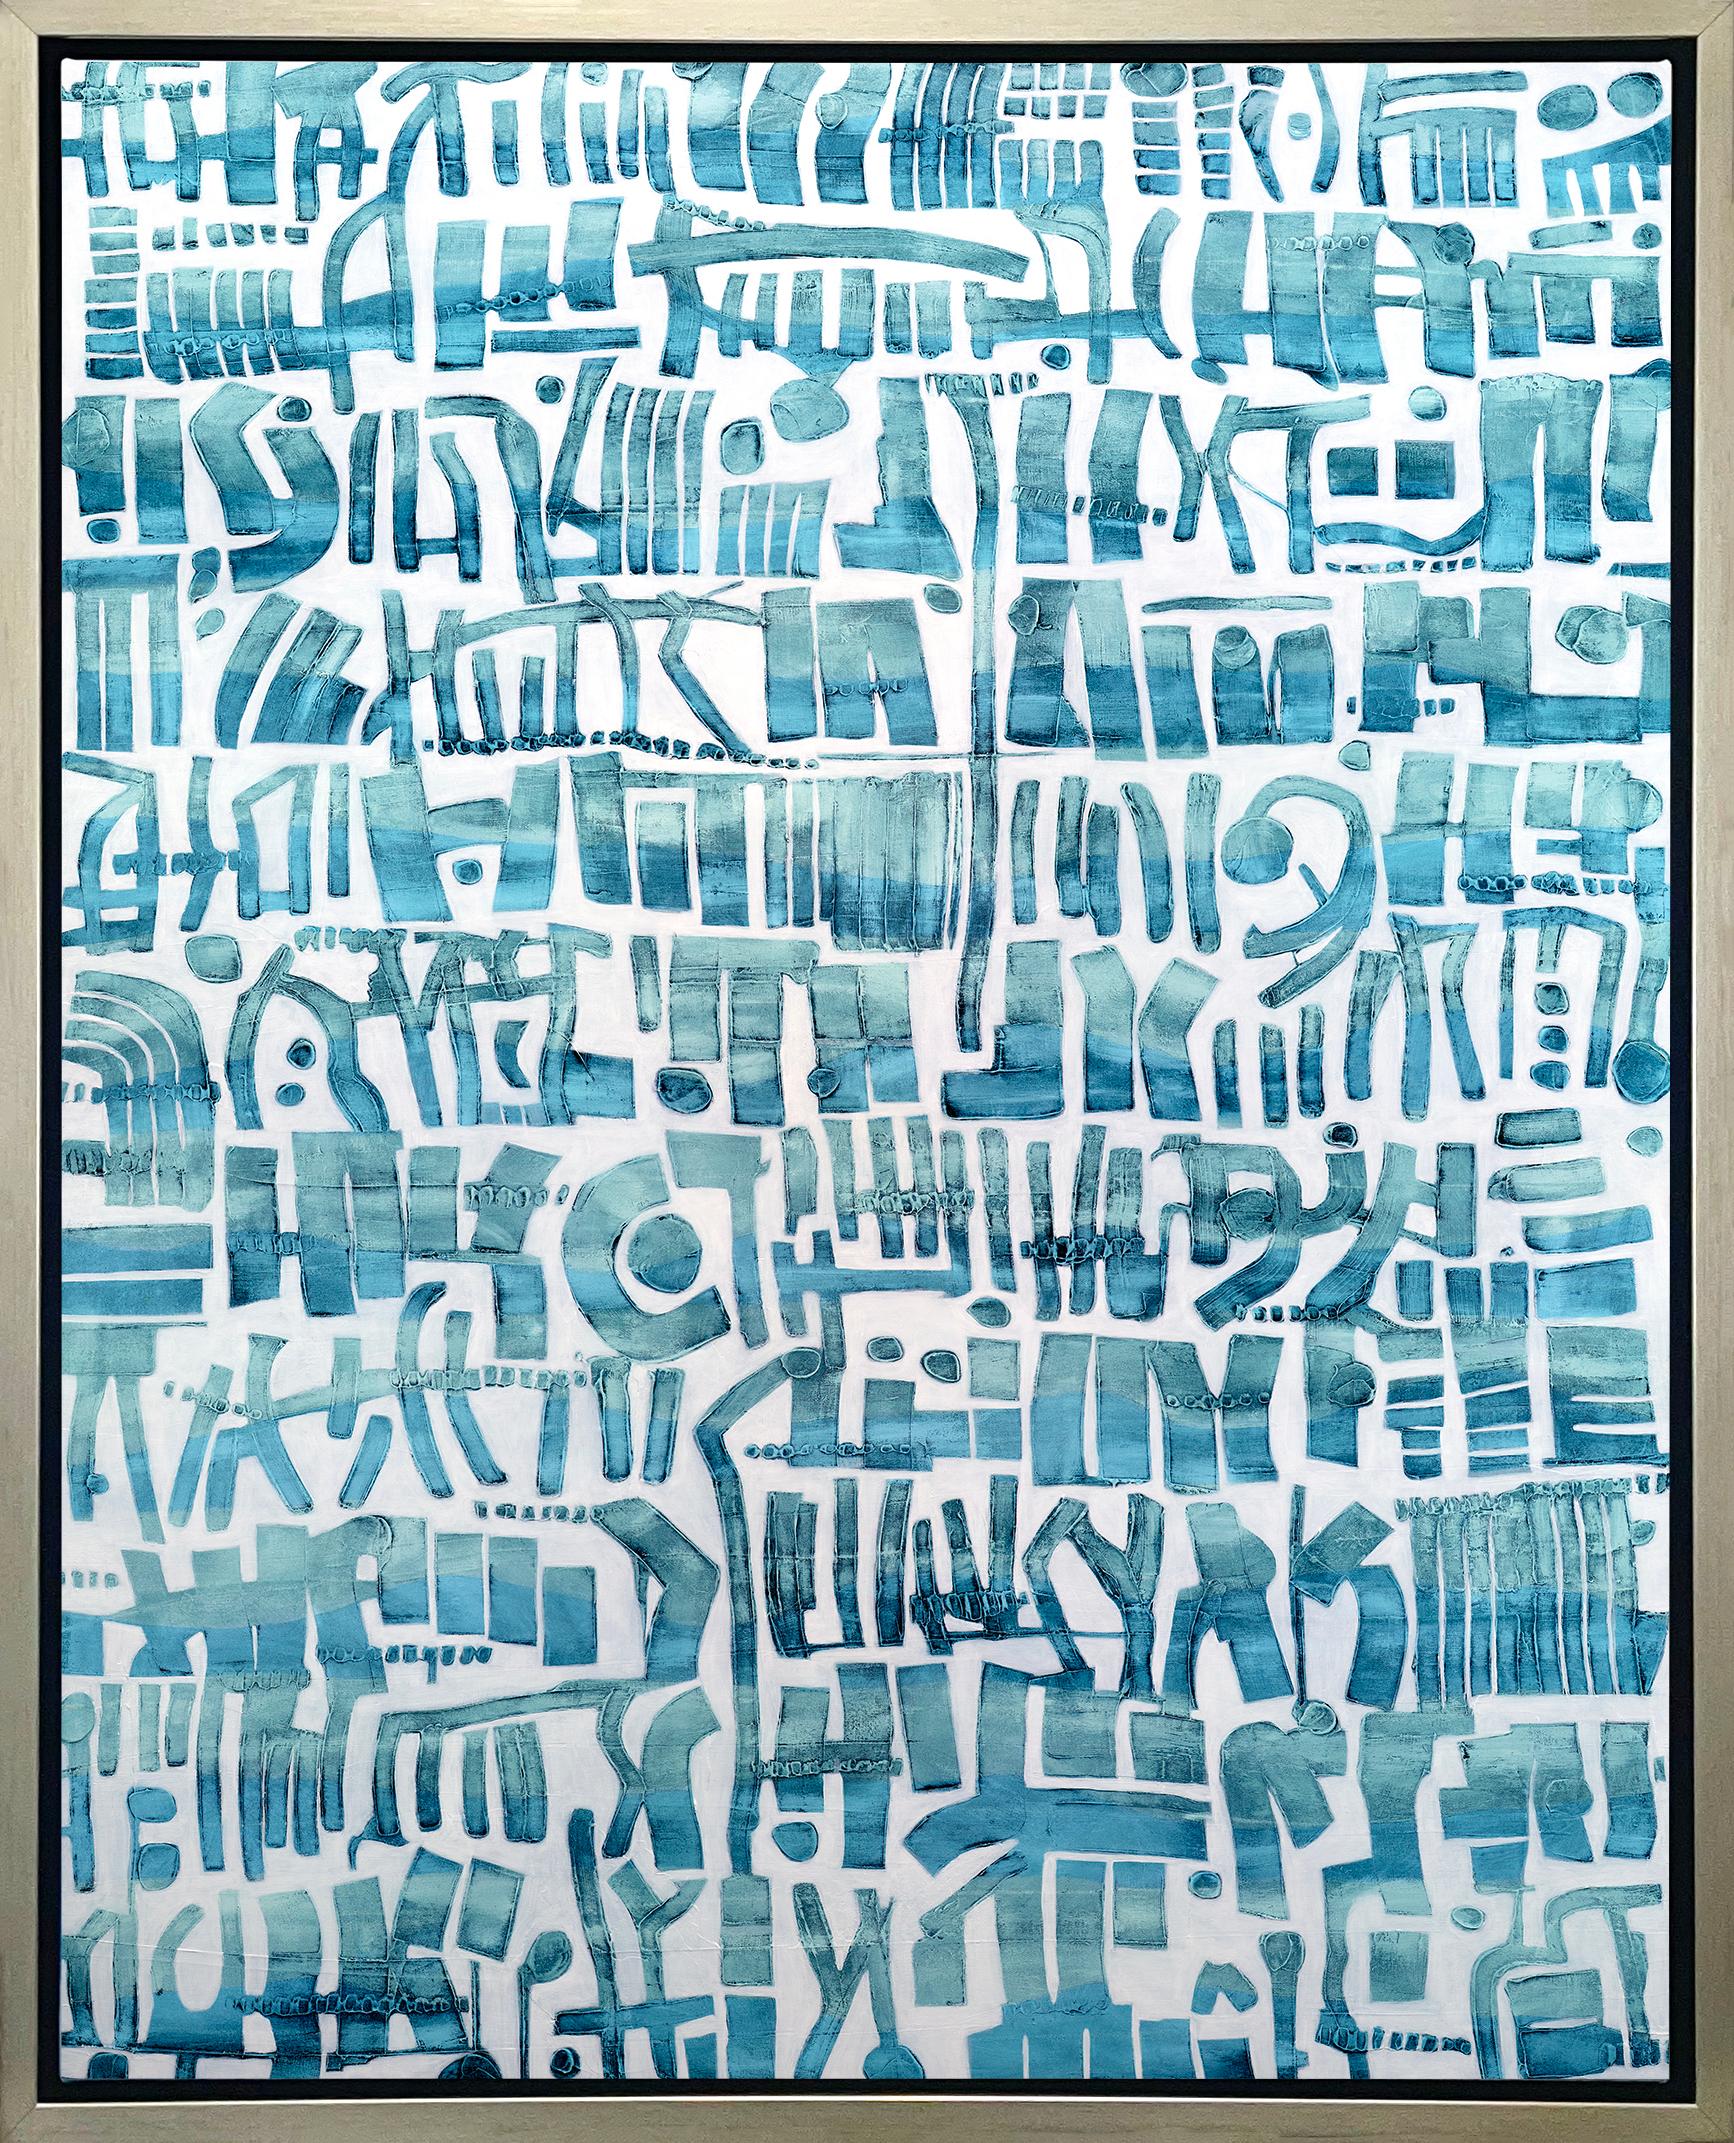 Sofie Swann Abstract Print - "Message in a Bottle, " Framed Limited Edition Giclee Print, 45" x 36"